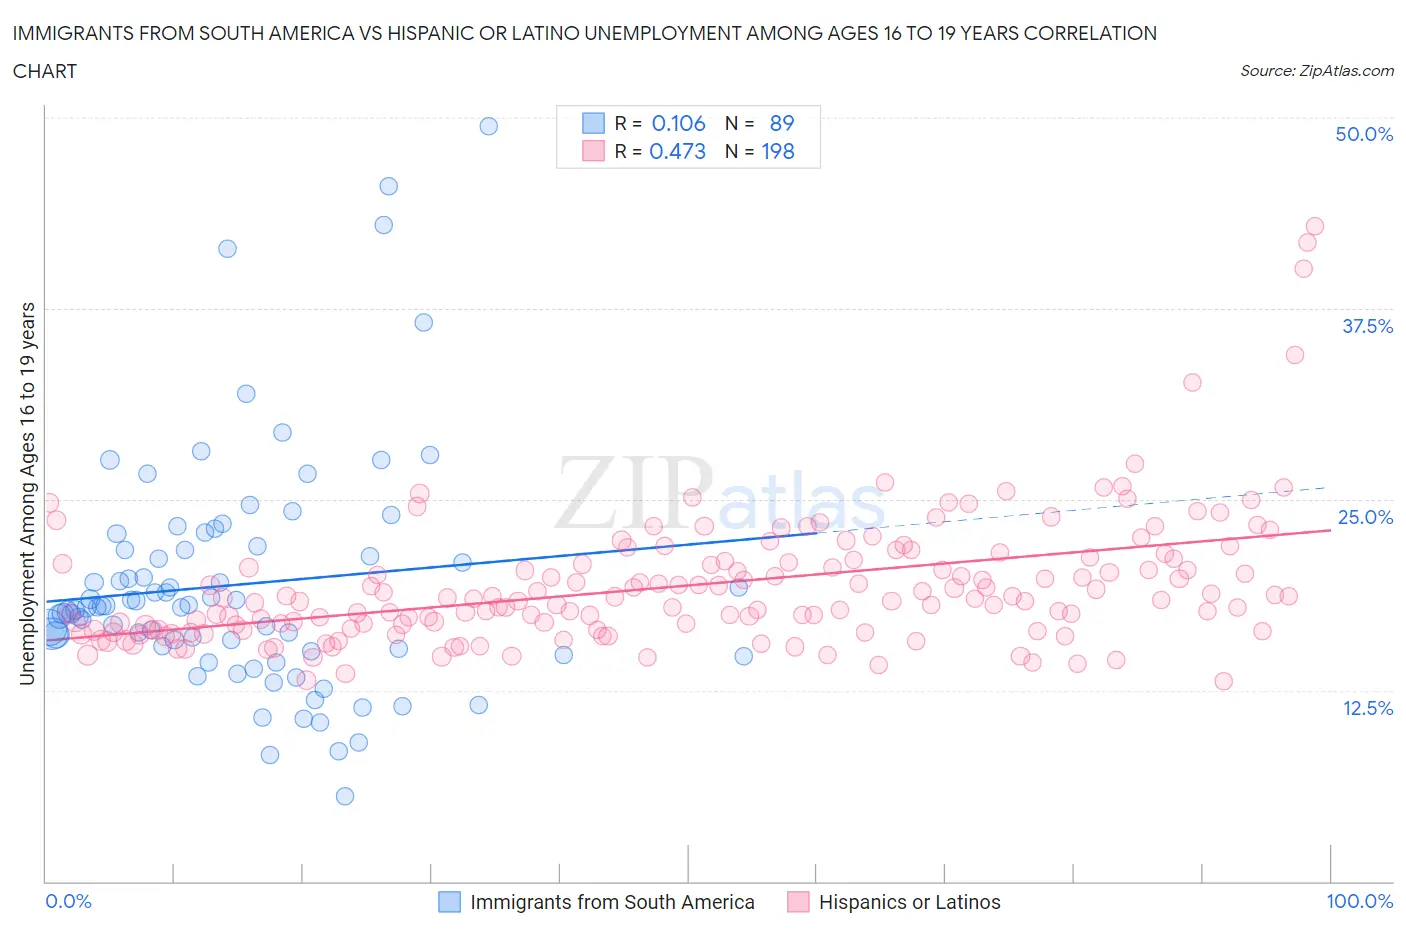 Immigrants from South America vs Hispanic or Latino Unemployment Among Ages 16 to 19 years